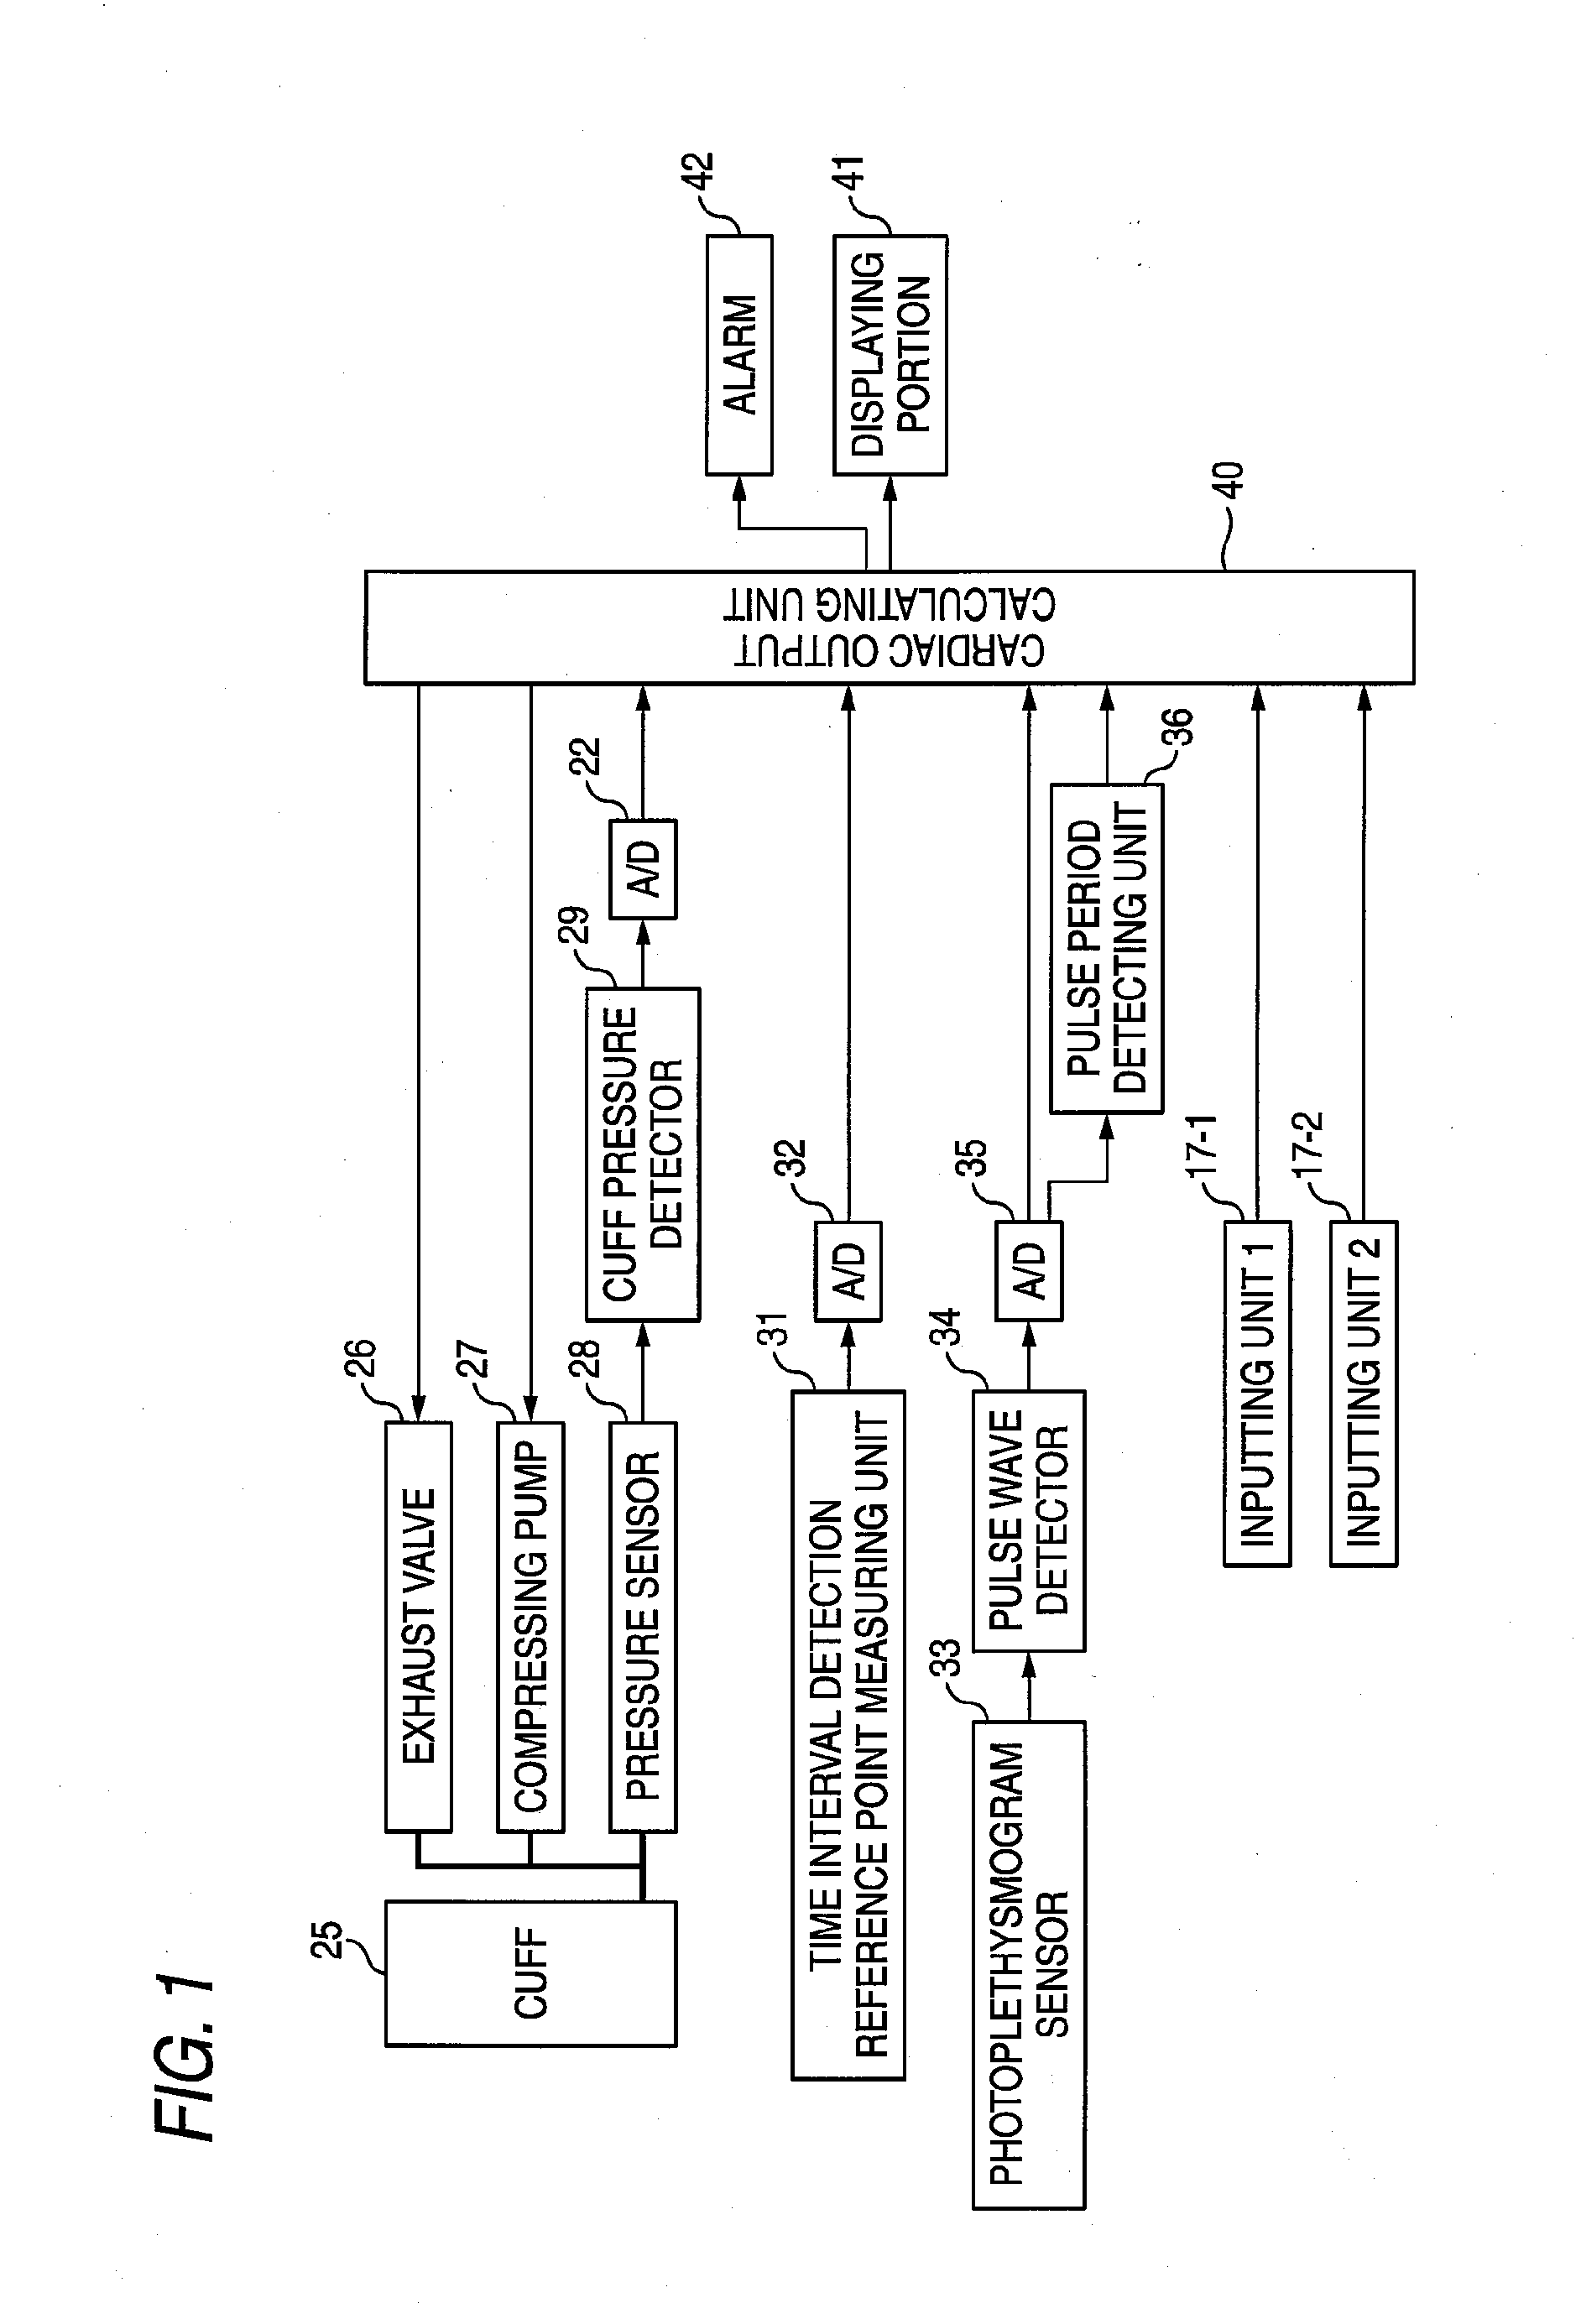 Method and apparatus for measuring blood volume